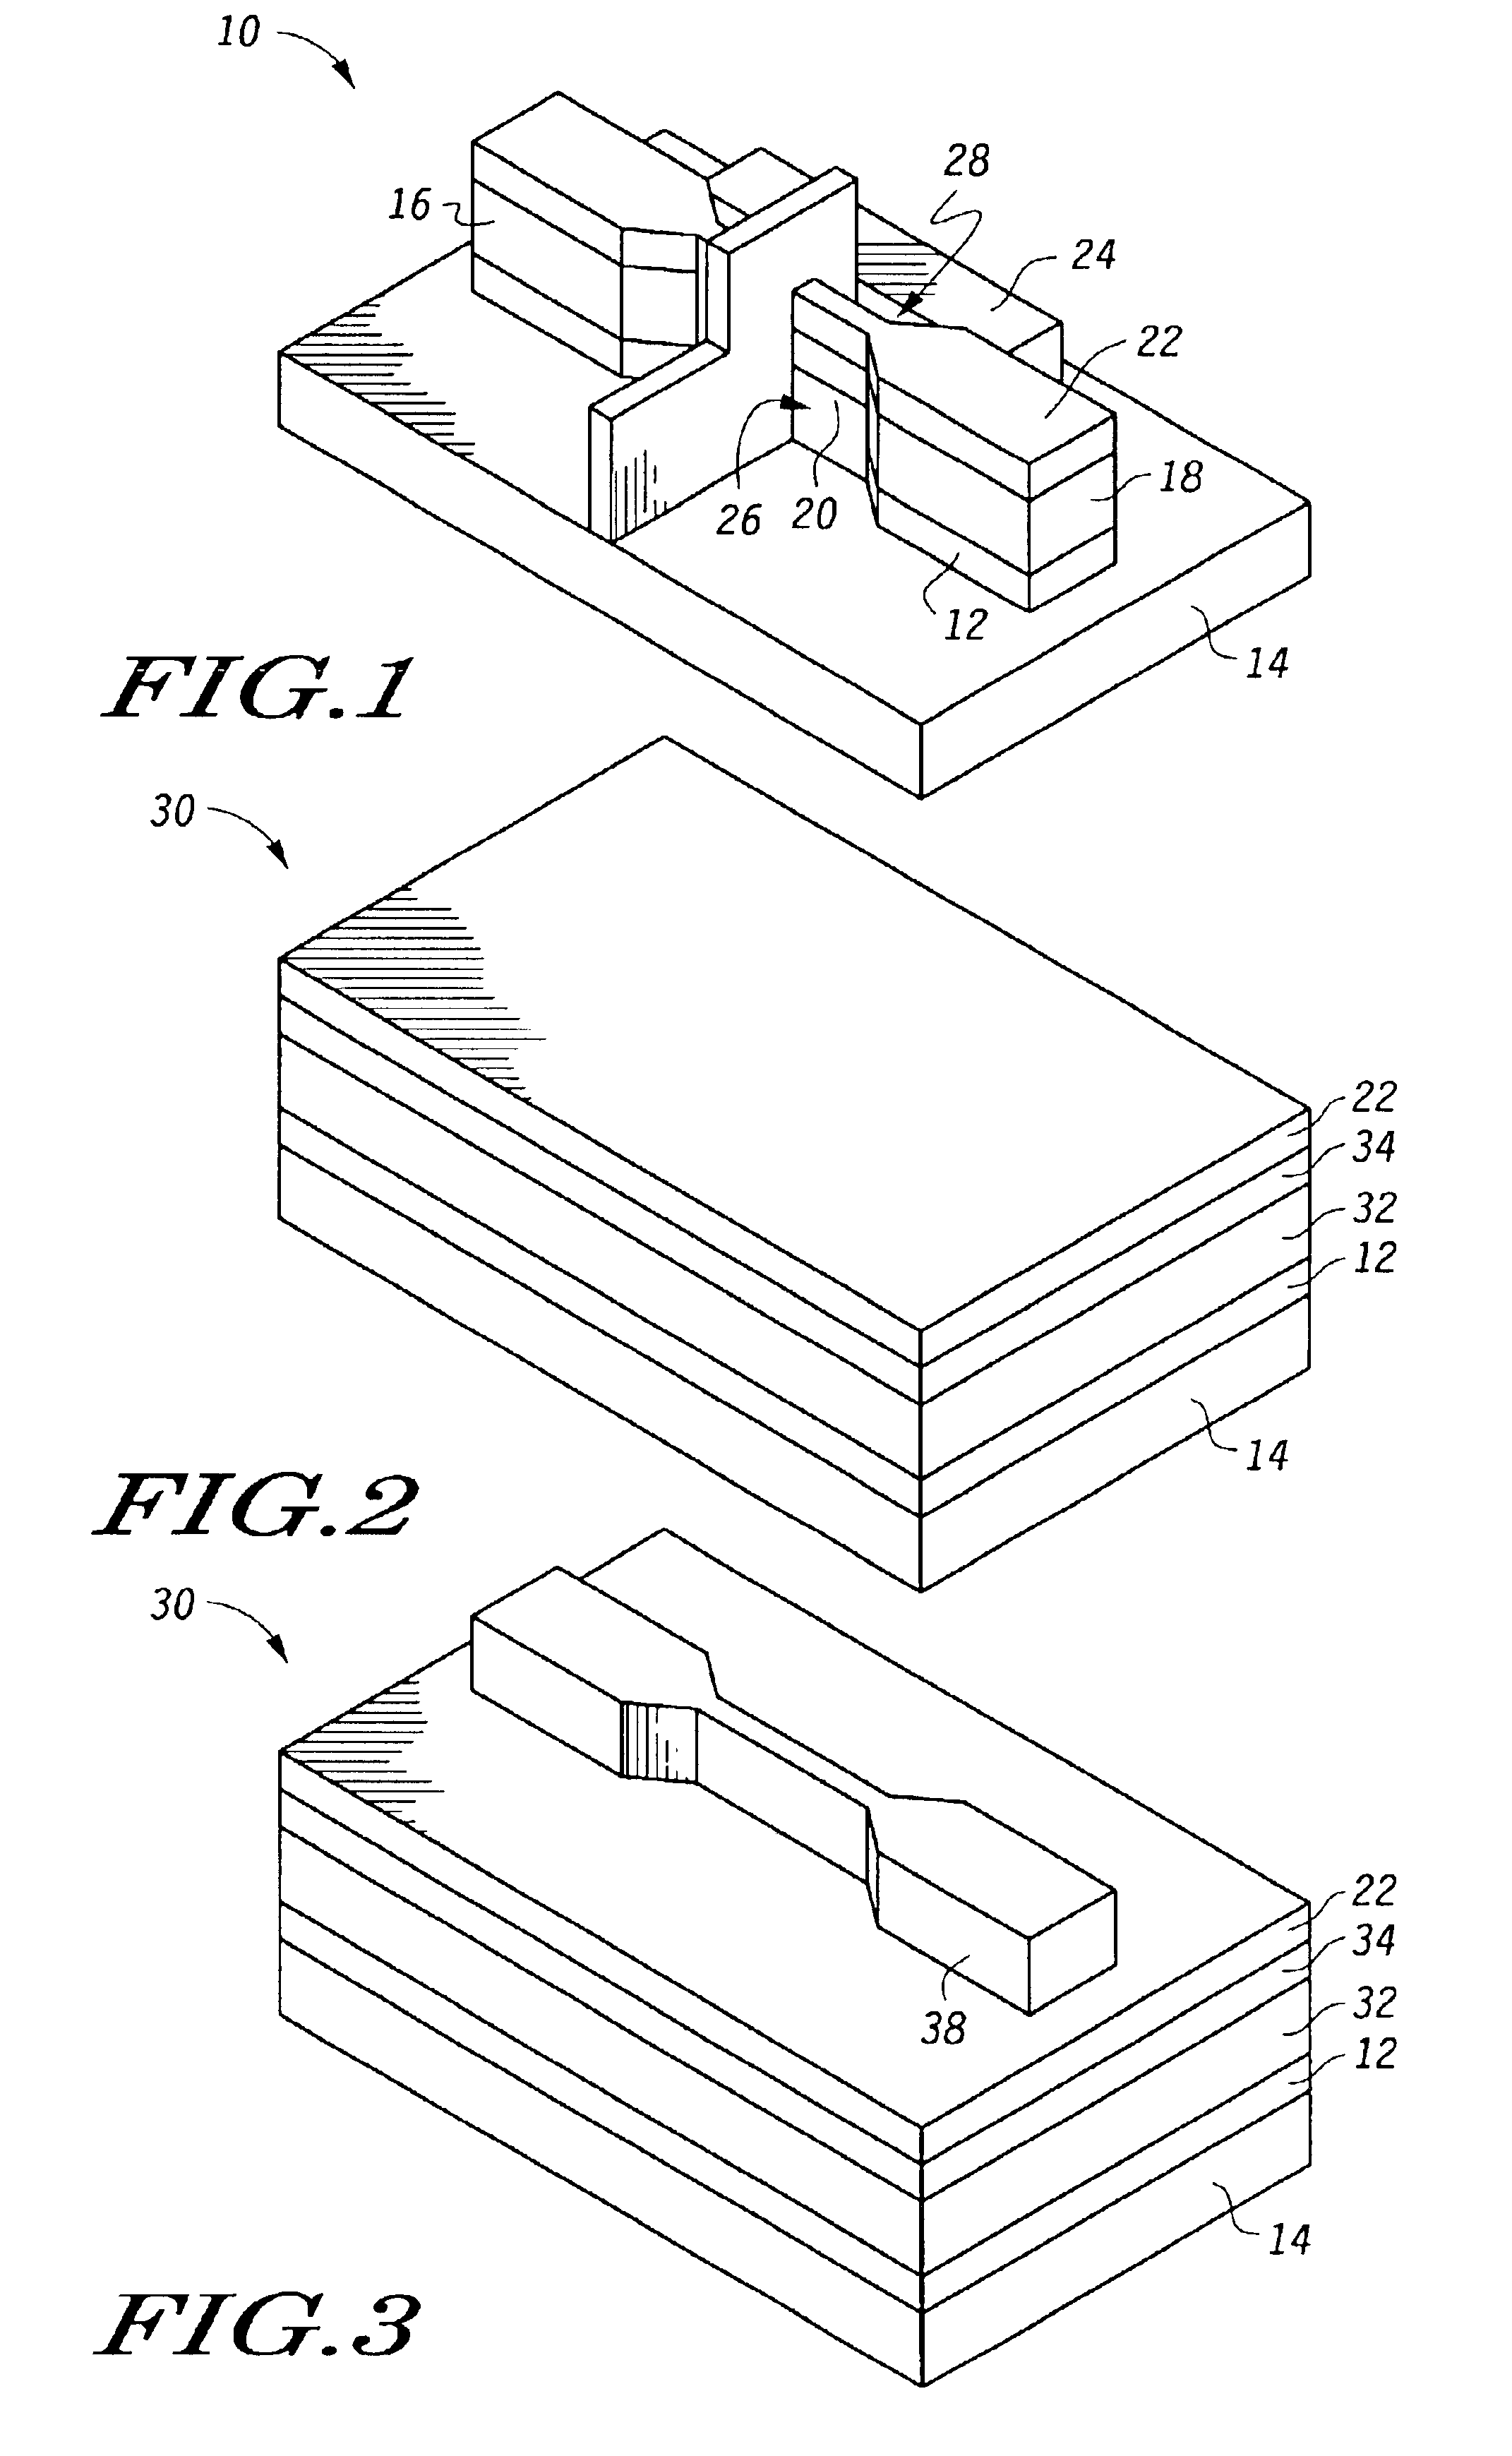 Method for forming a double-gated semiconductor device